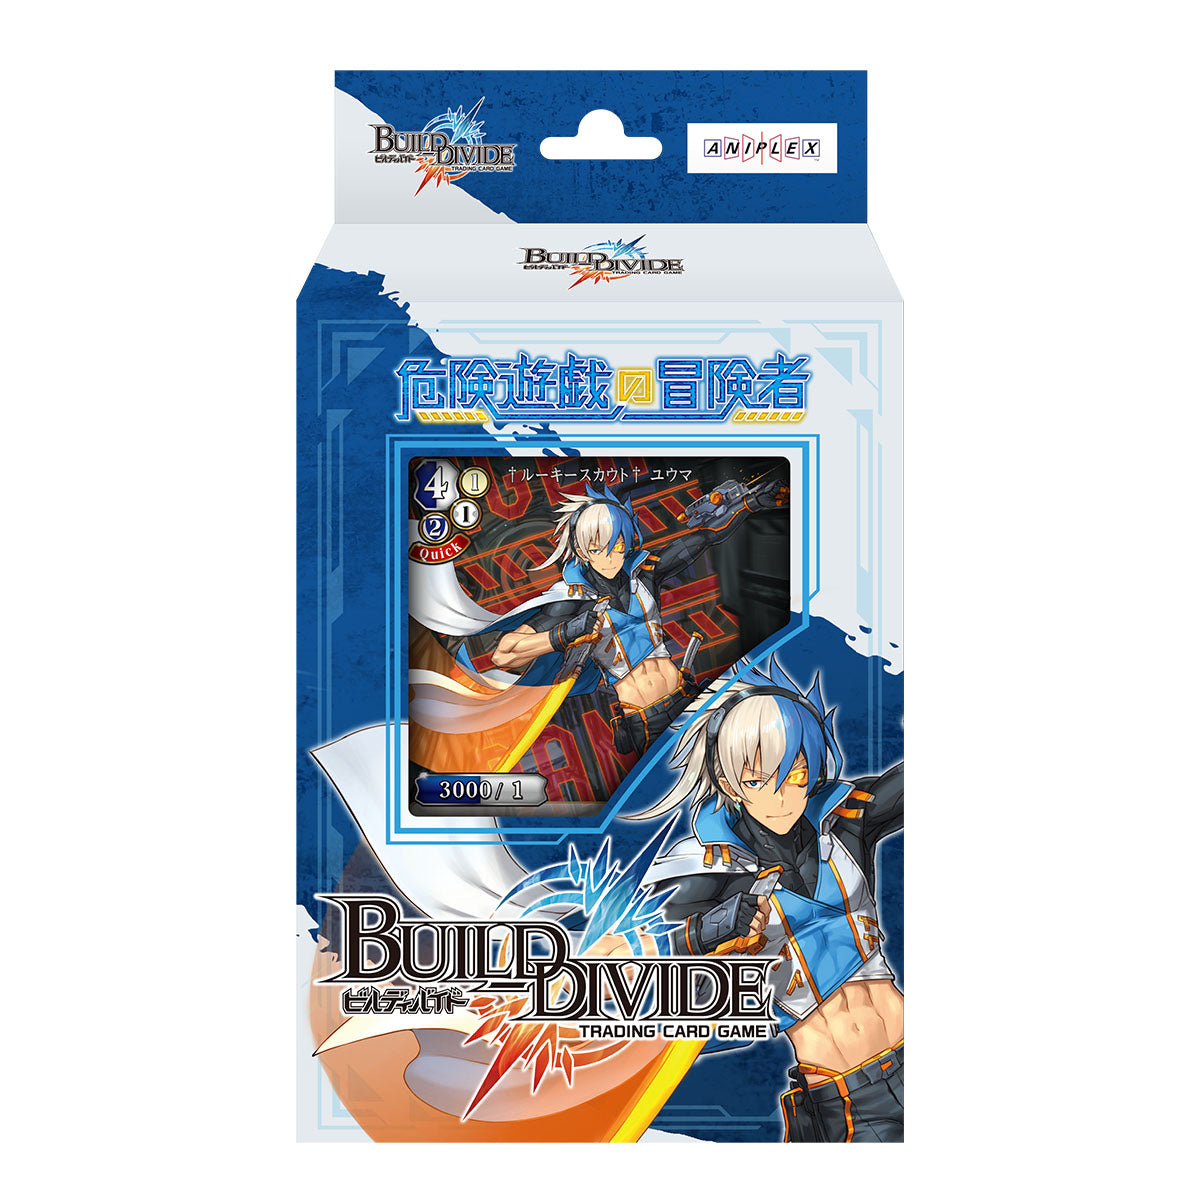 Build Divide Trial Deck Vol. 05 "Adventurers in a Dangerous Game" [BD-B-SD05] (Japanese)-Aniplex-Ace Cards & Collectibles